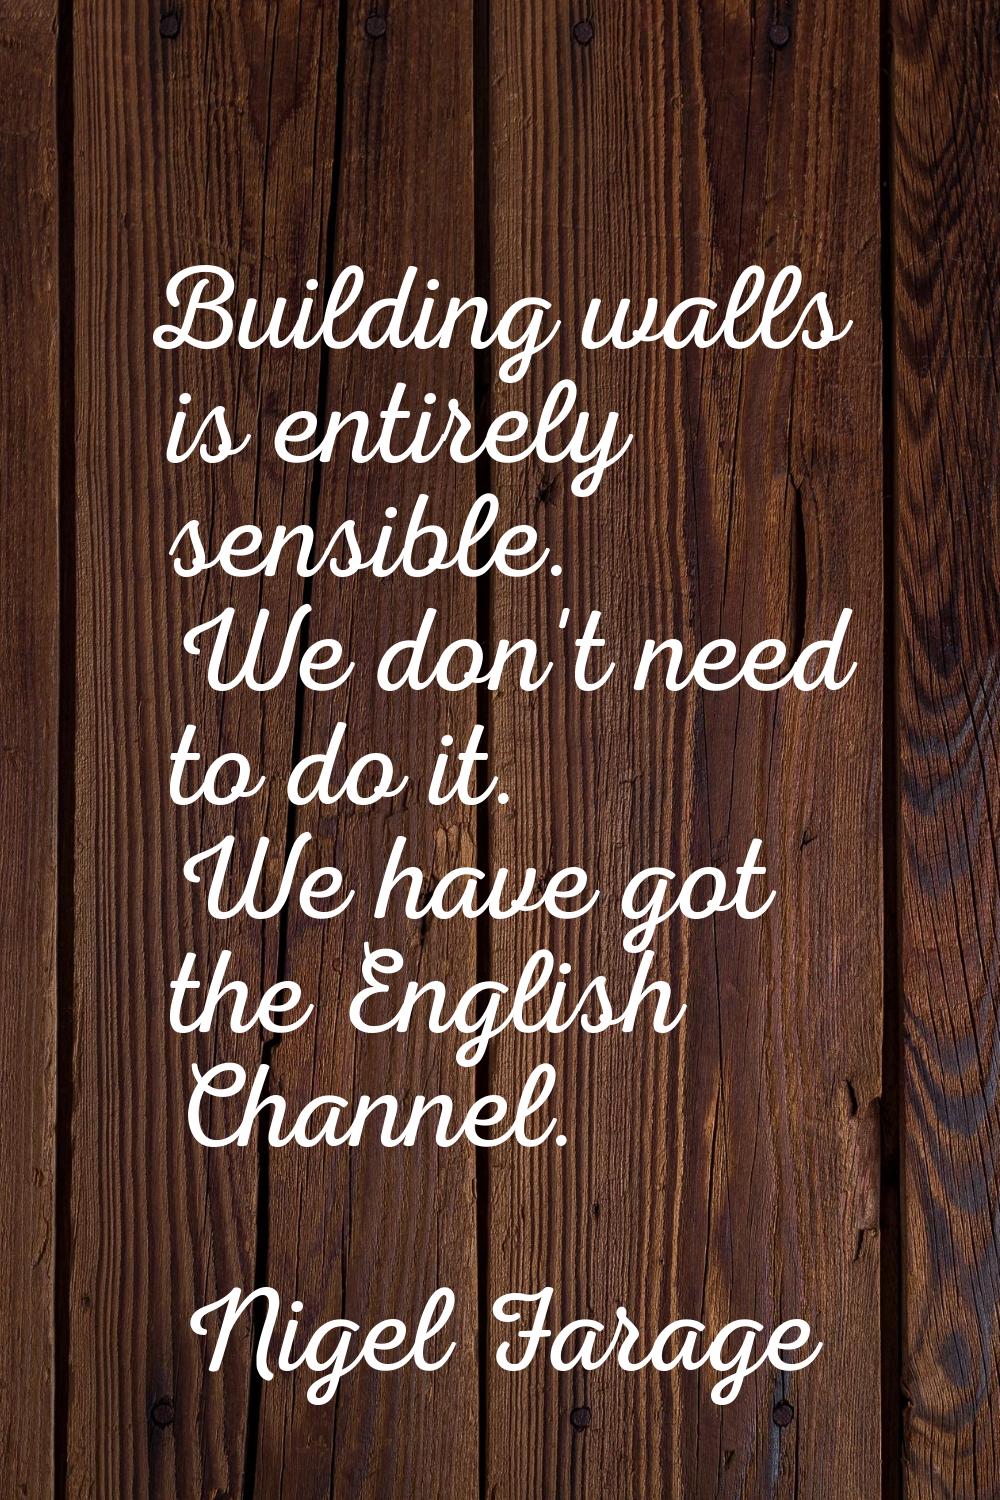 Building walls is entirely sensible. We don't need to do it. We have got the English Channel.